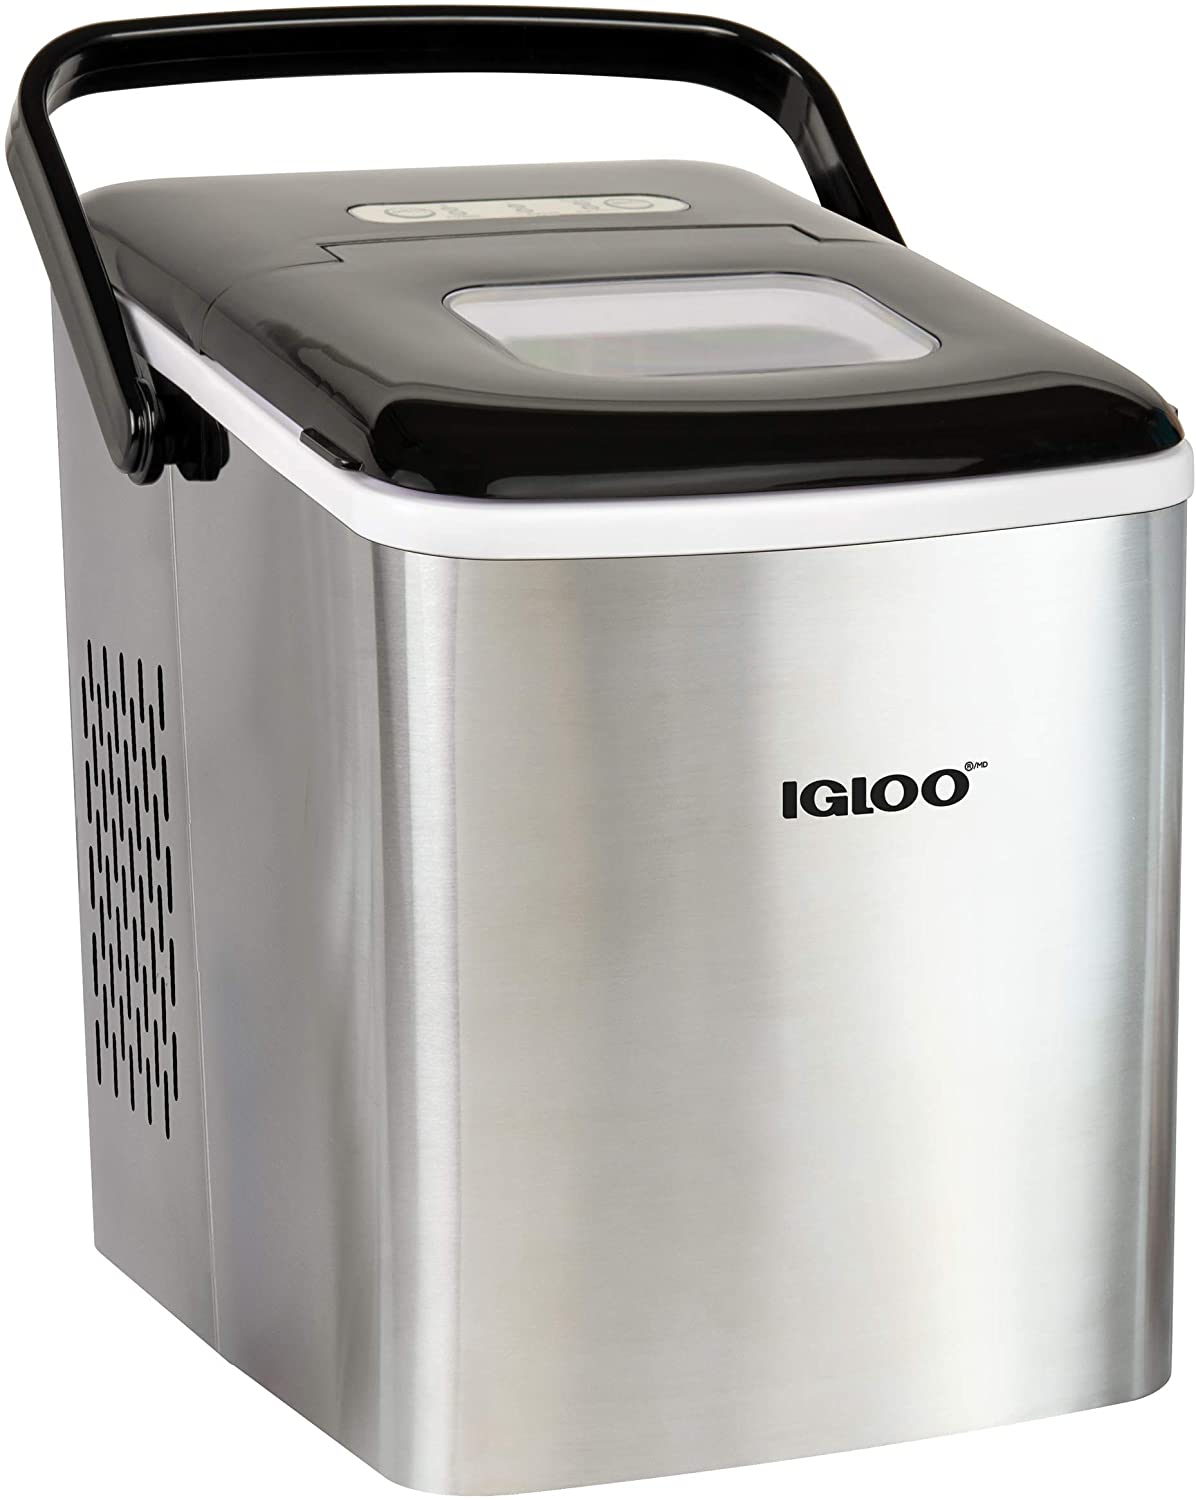 Igloo ICEB26HNSS Automatic Self-Cleaning Portable Electric Countertop Ice Maker